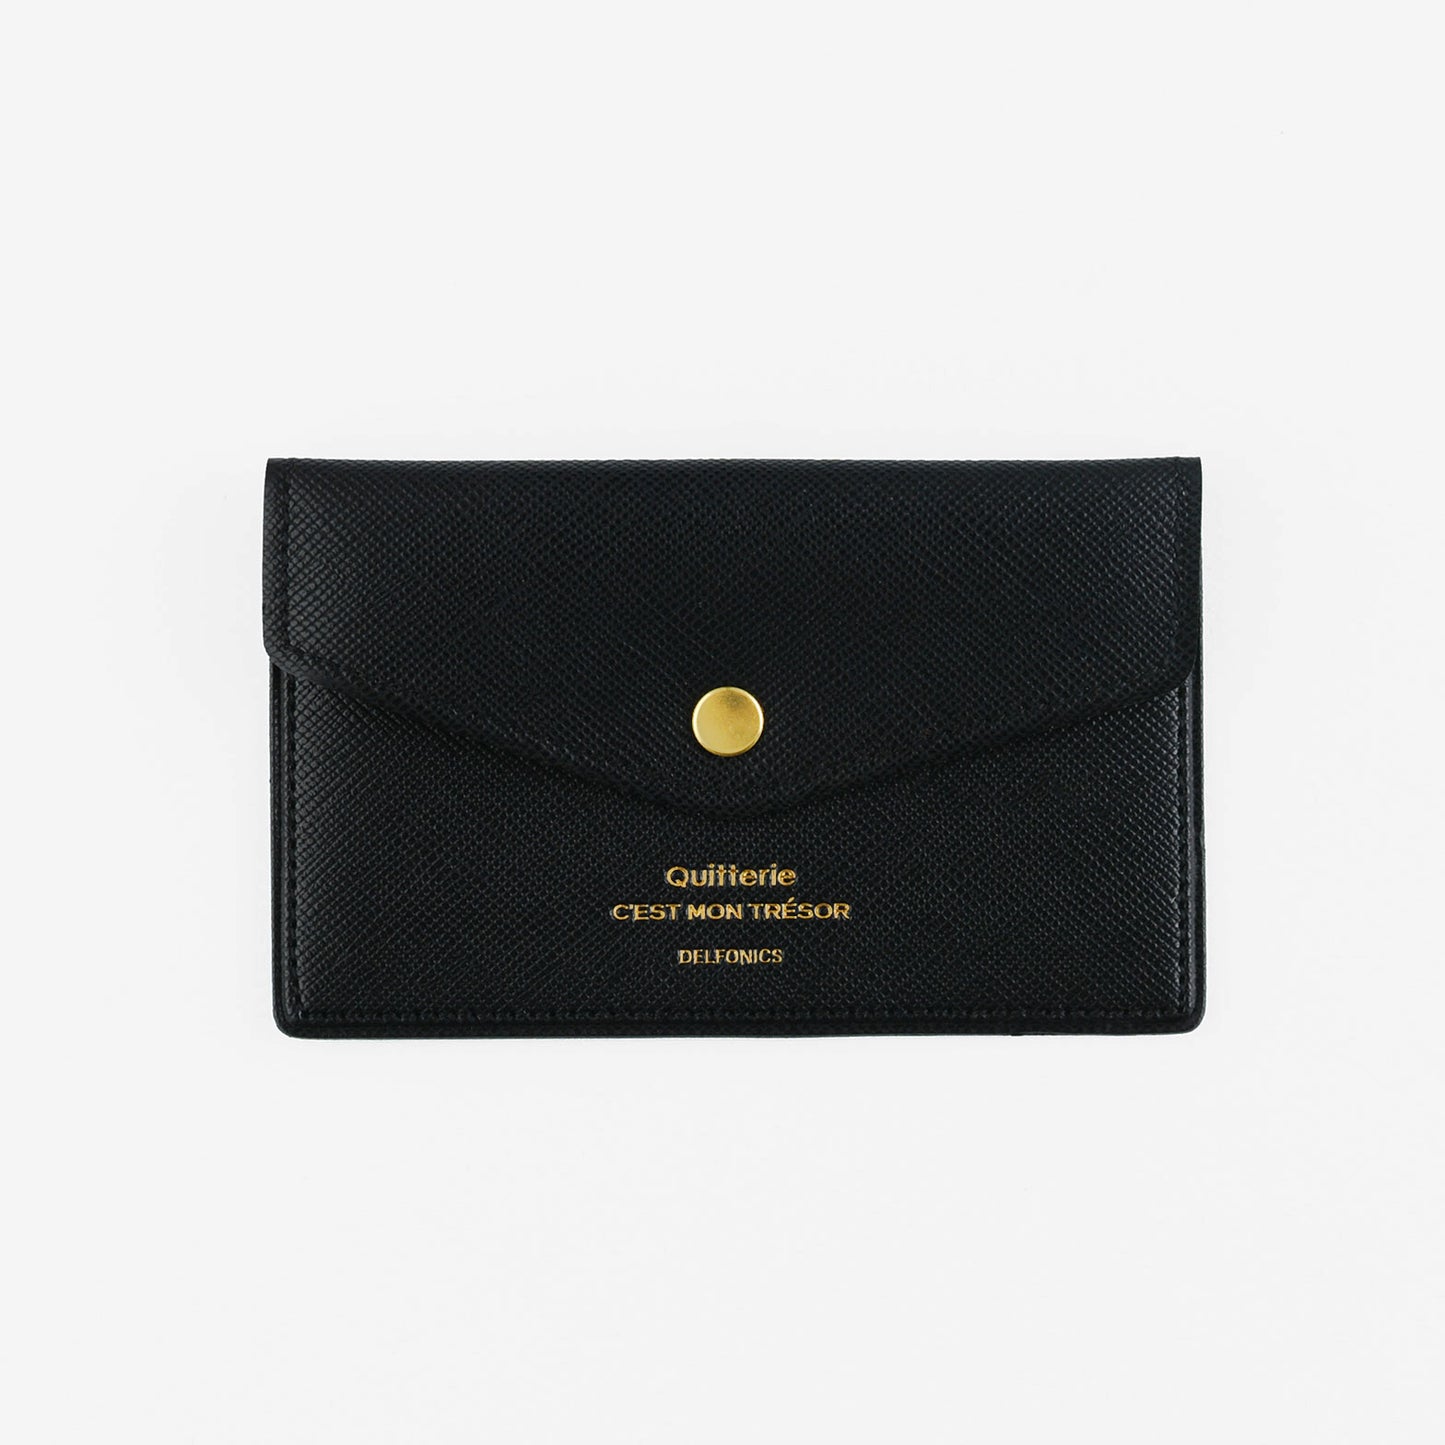 Null Quitterie Card Case Black 